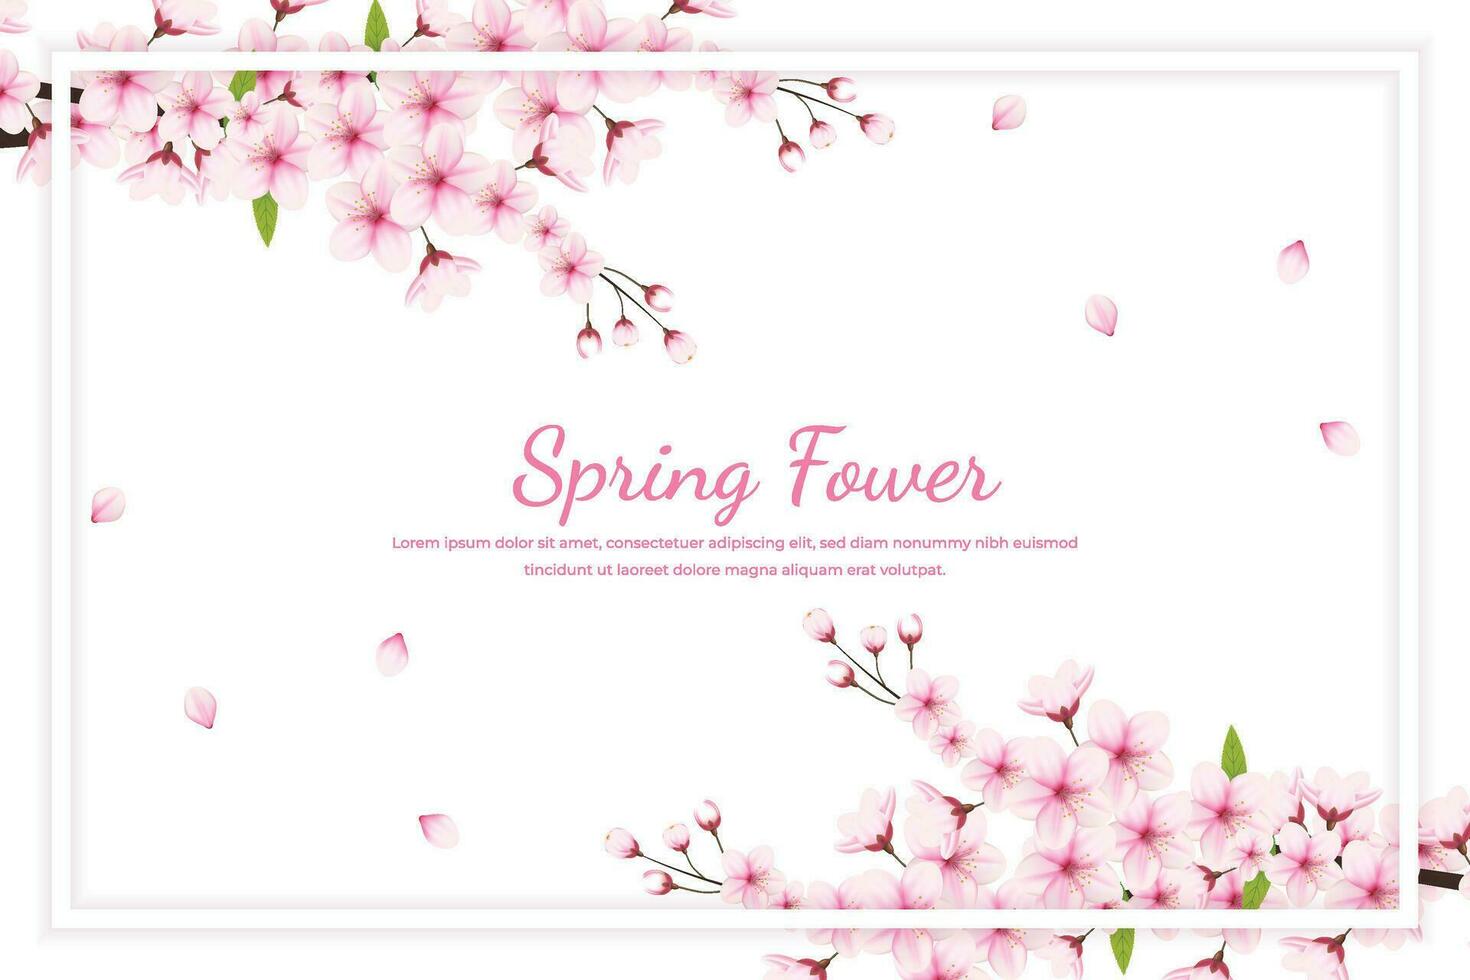 Cherry blossom background with white frame for text. Vector illustration.